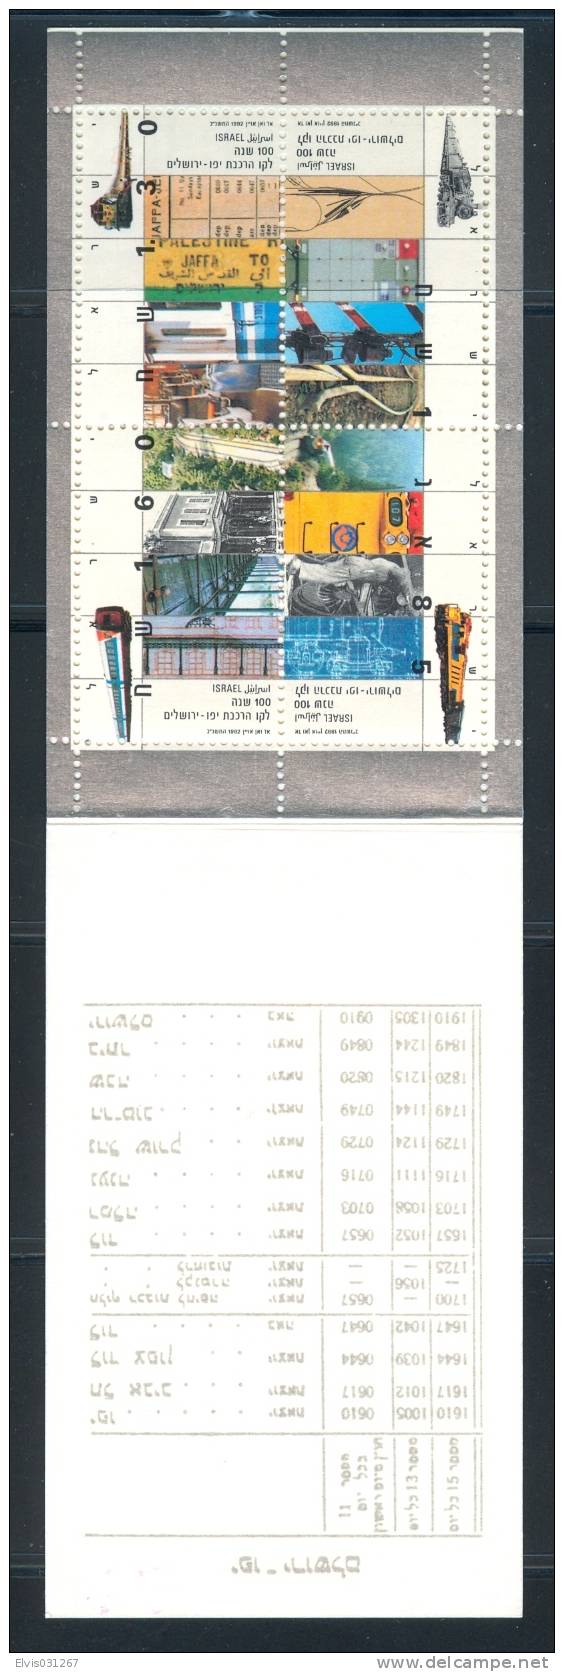 Israel BOOKLET - 1992, Michel/Philex Nr. : 1226-1229, - MNH - Mint Condition - Carnets